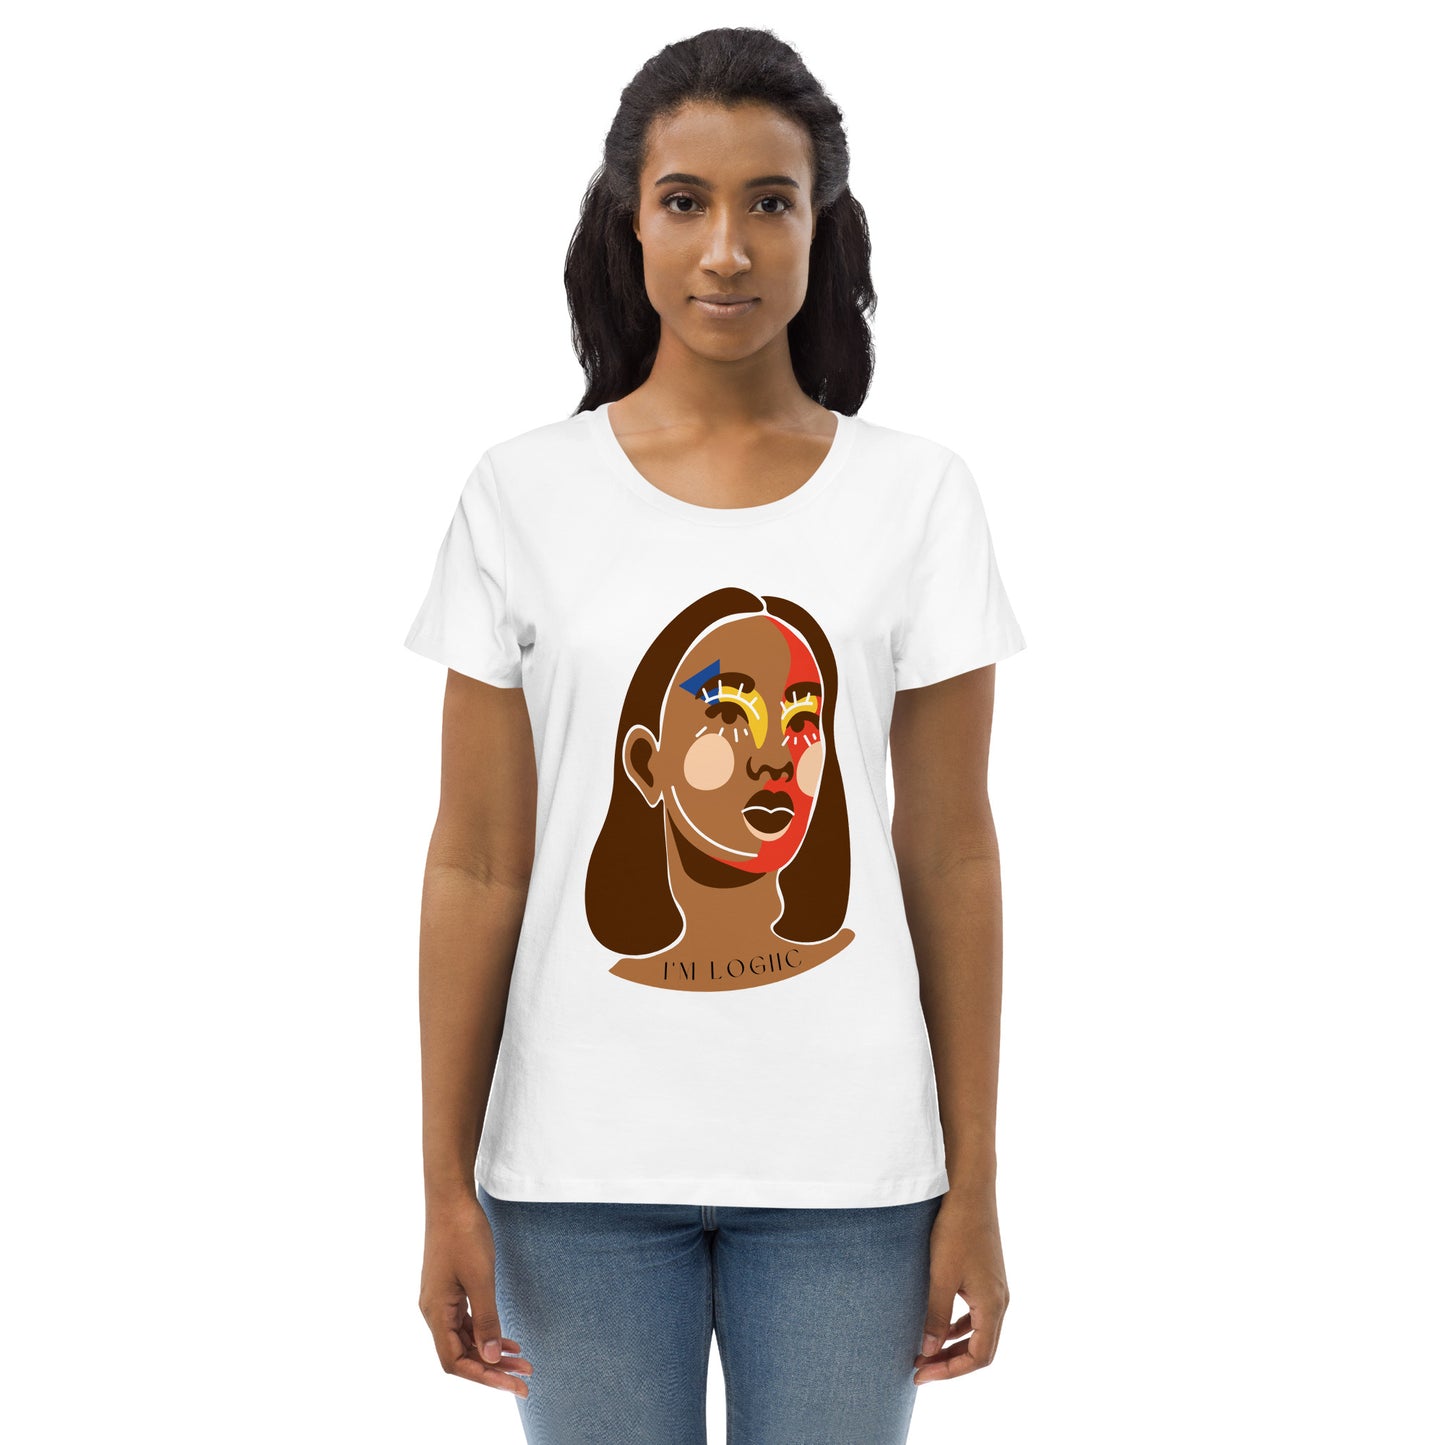 Women of God fitted eco tee